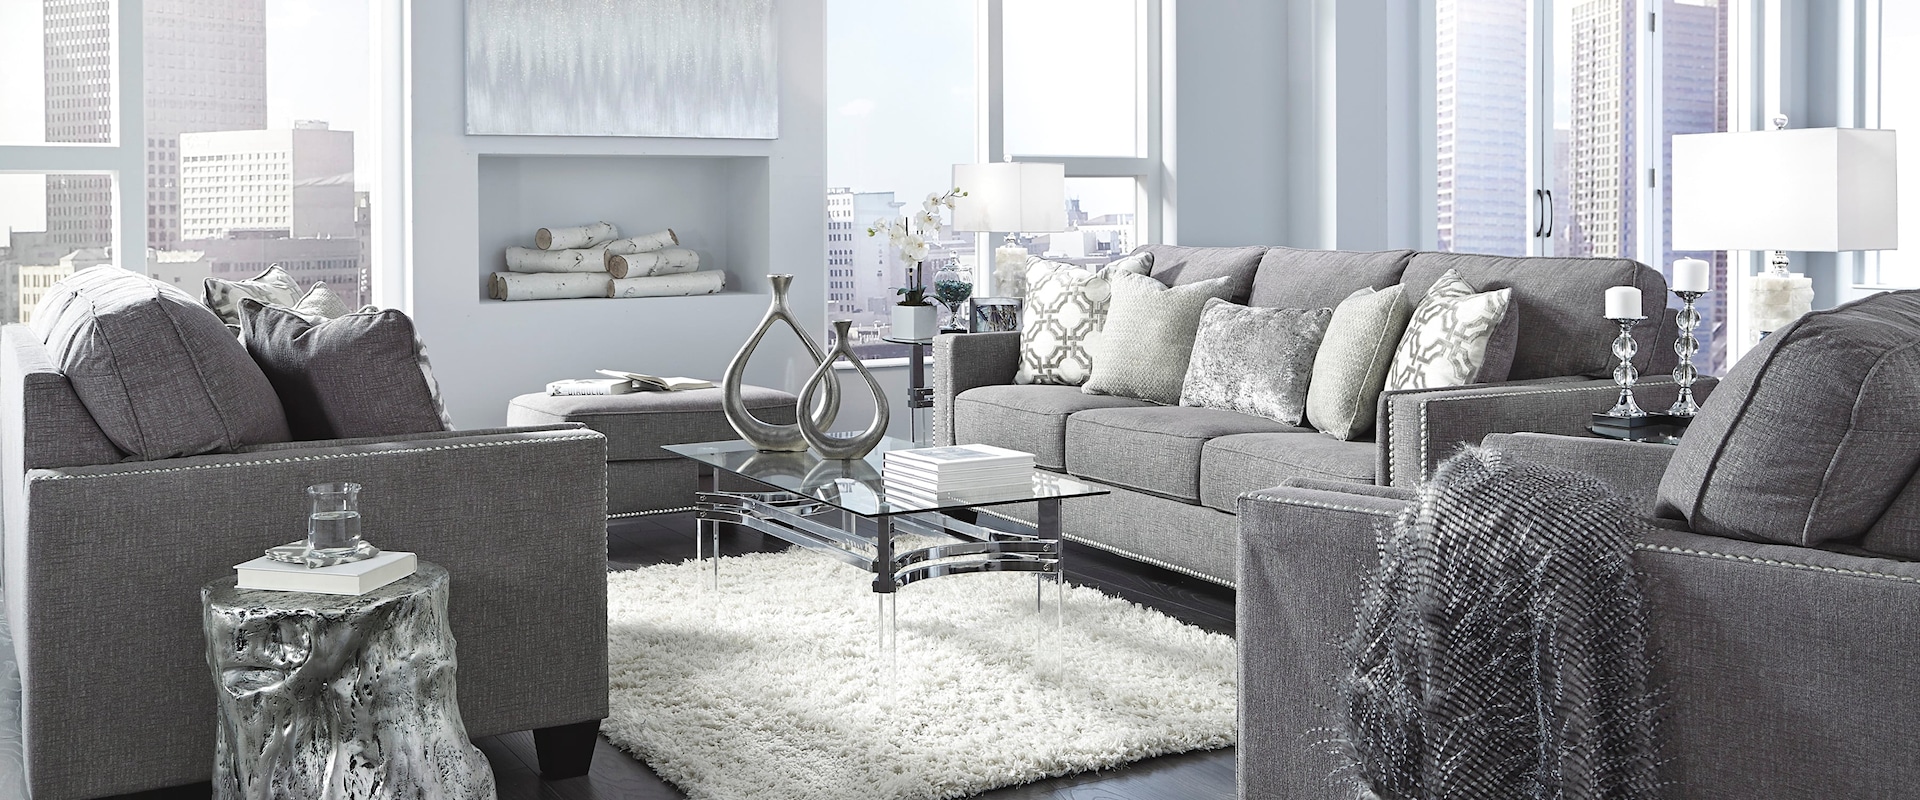 Casual 4-Piece Living Room Set with Sofa, Loveseat, Chair, and Ottoman